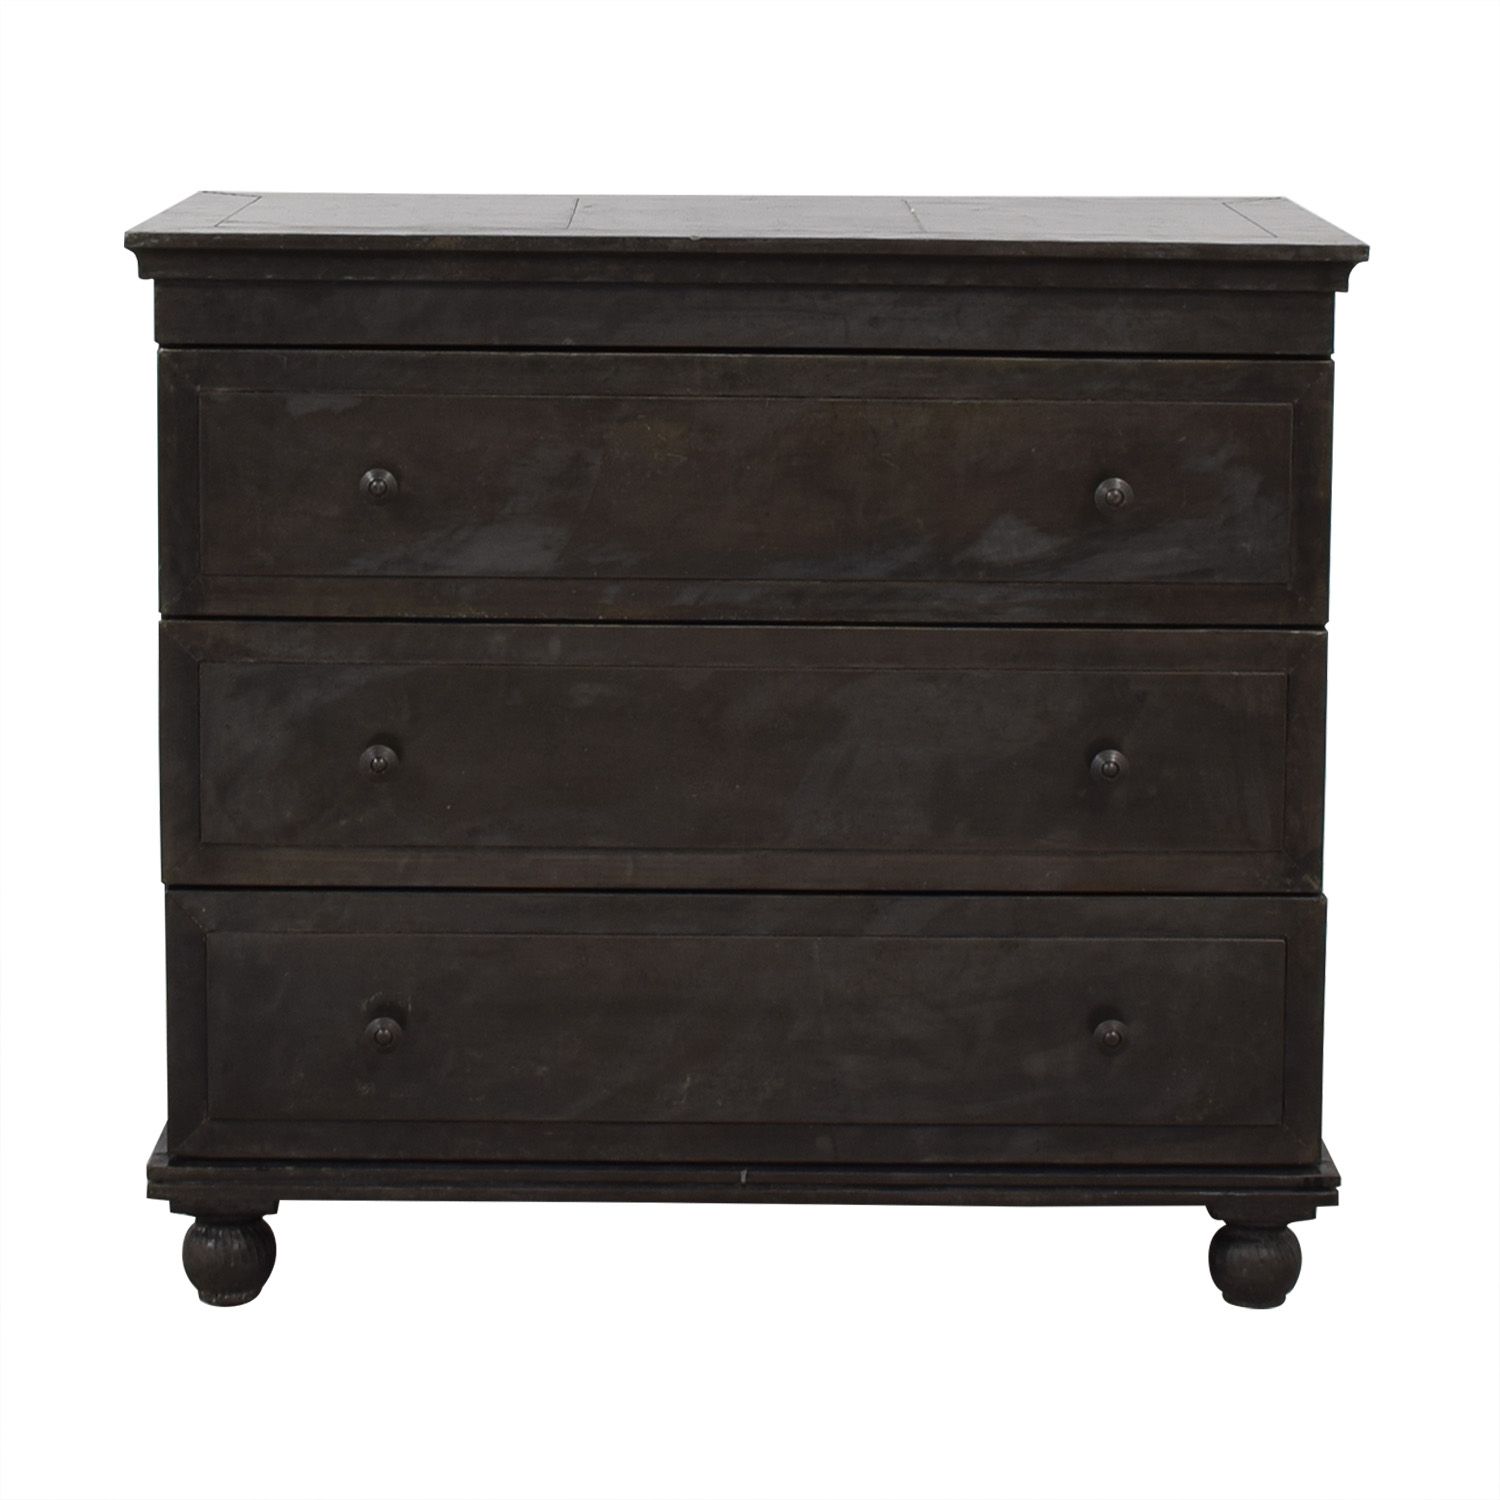 71% Off – Restoration Hardware Restoration Hardware Annecy Dresser / Storage Within Annecy Sideboards (View 18 of 30)